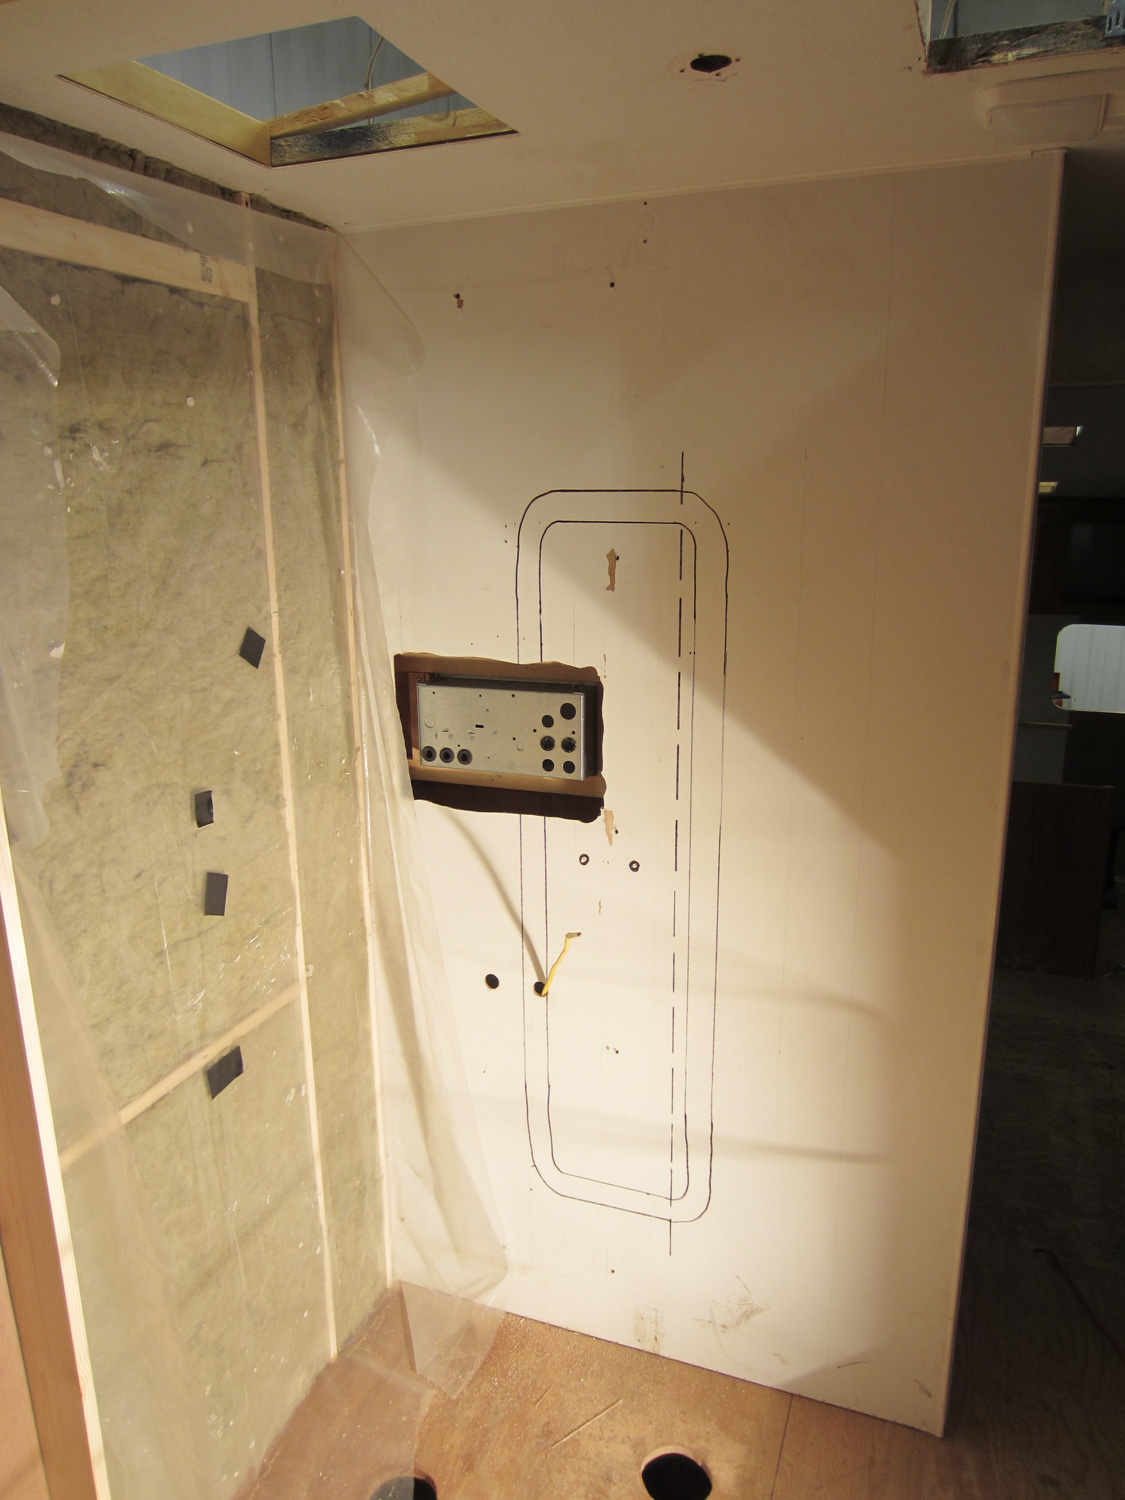  We moved the distribution panel from underneath the fridge to the wall between the shower and the toilet. 